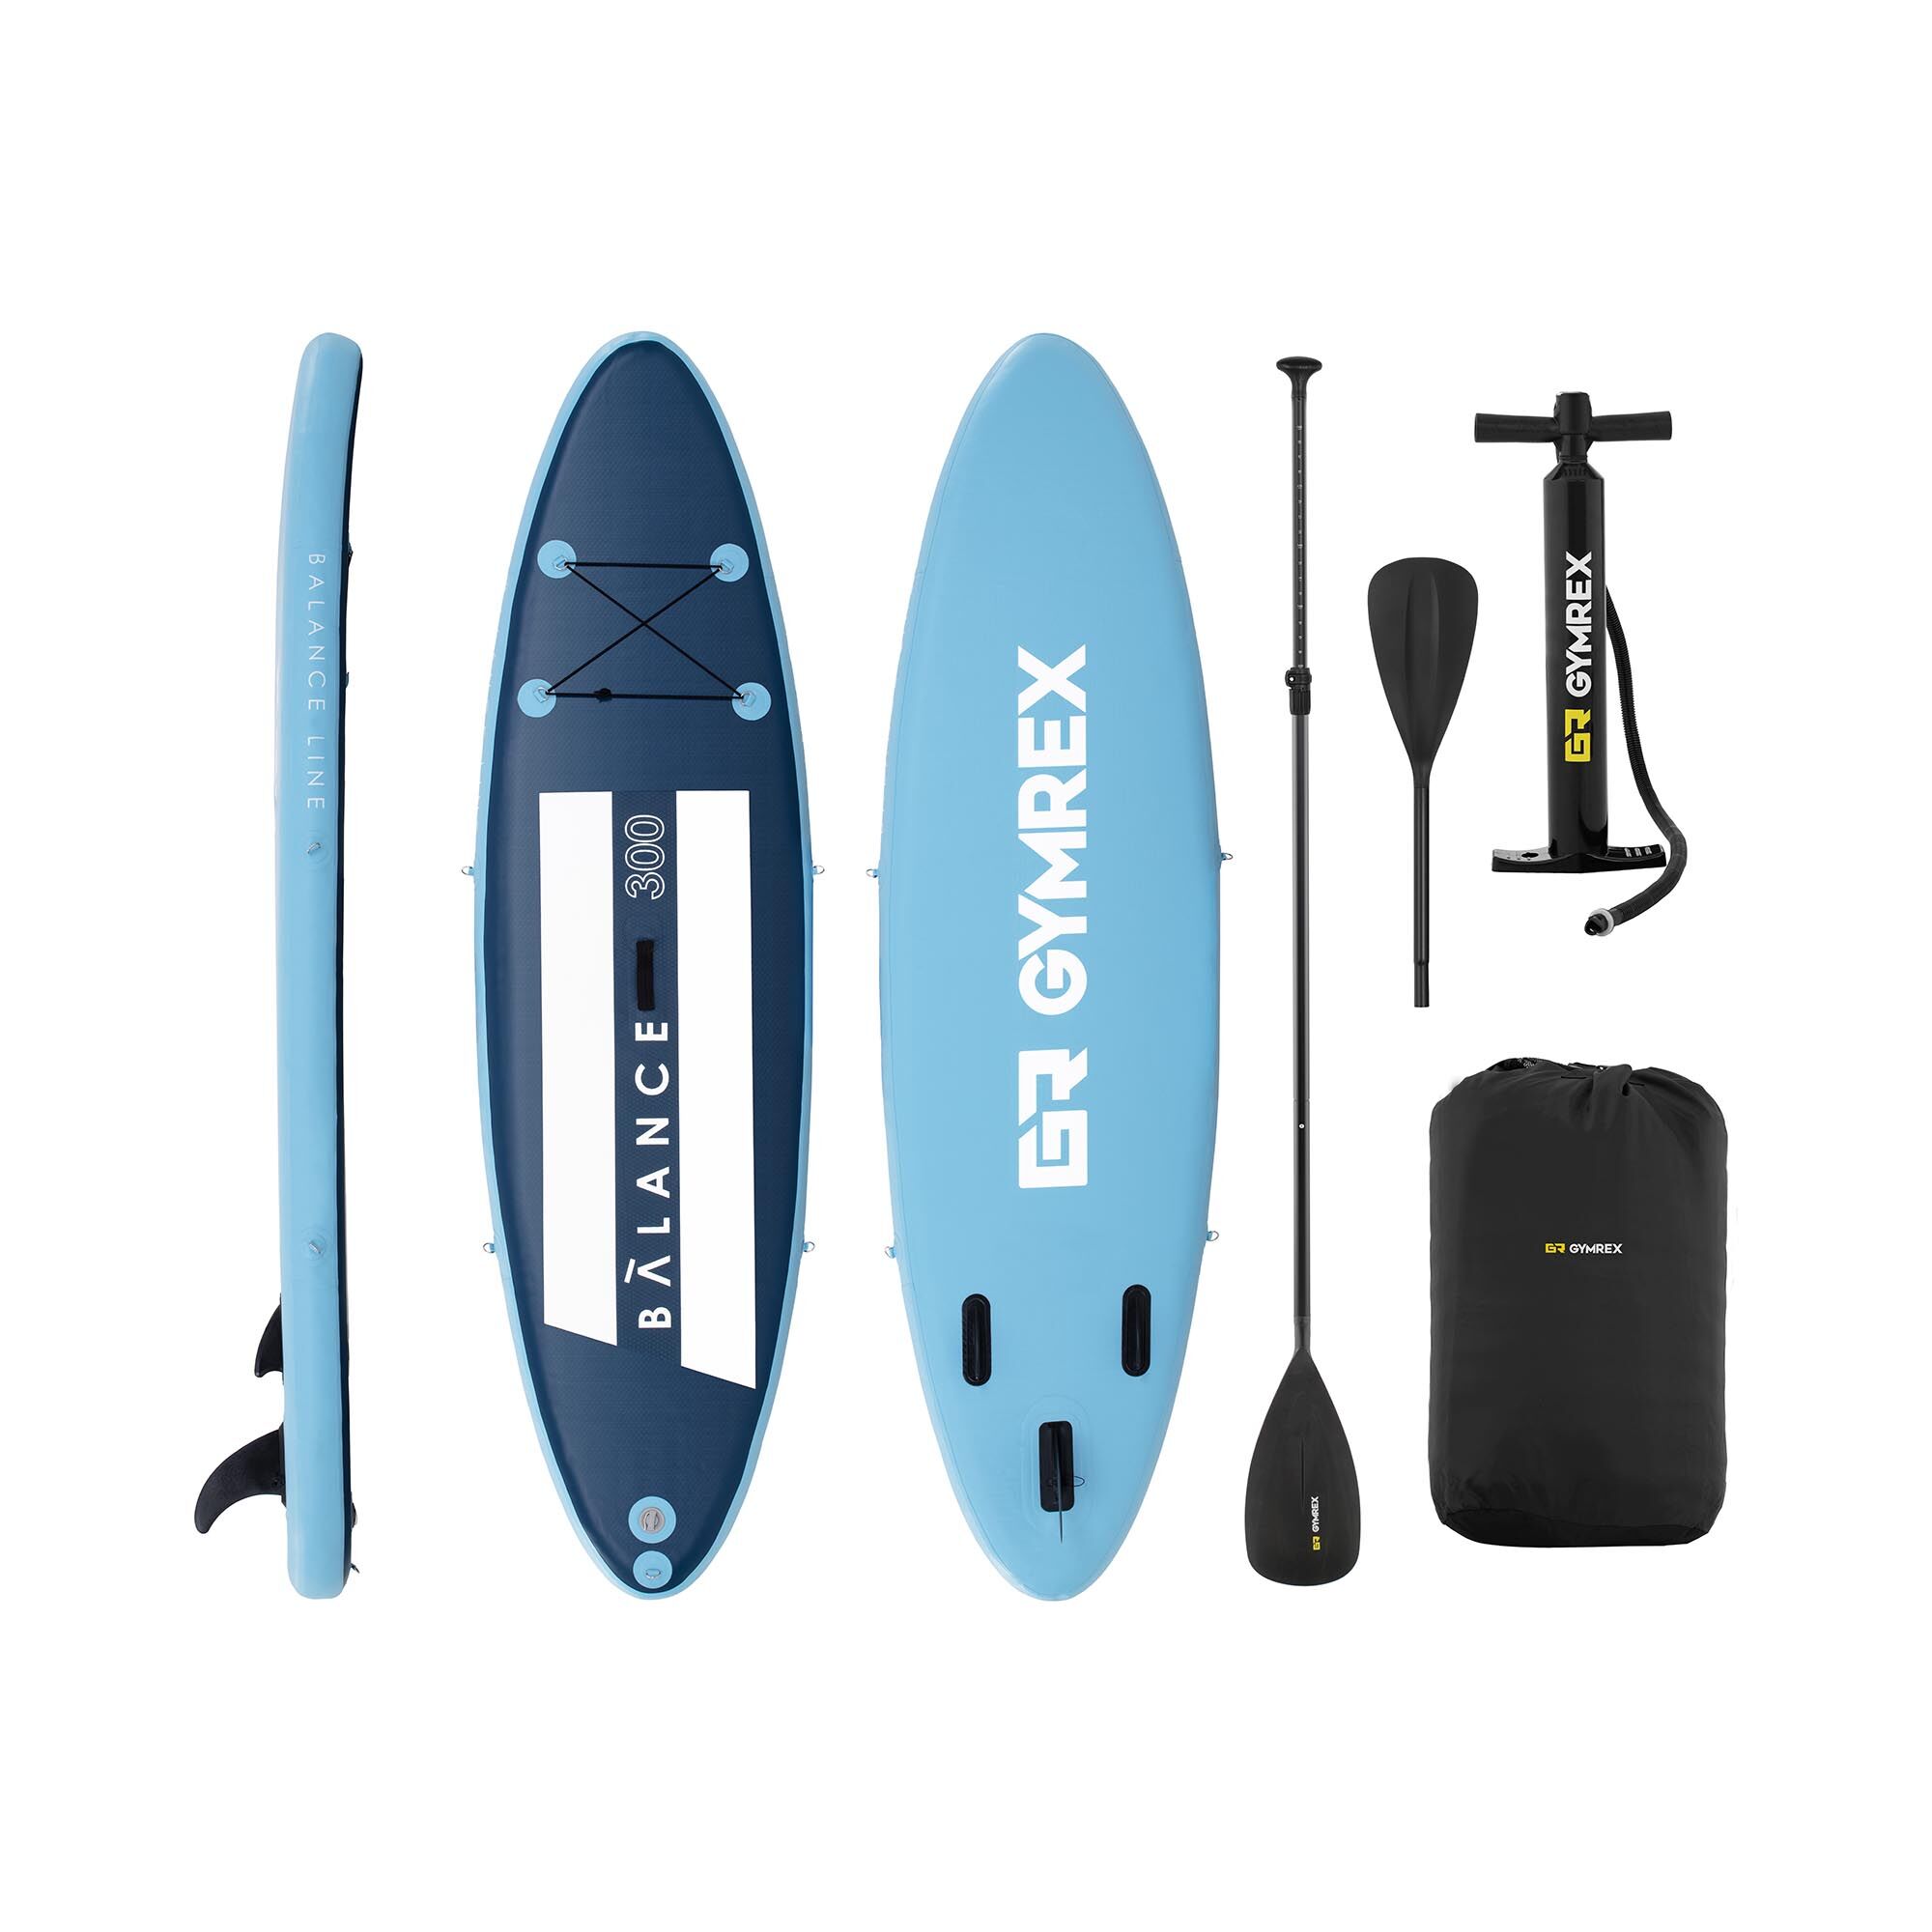 Gymrex Inflatable SUP Board - 135 kg - blue/navy blue - set with paddle and accessories GR-SPB300